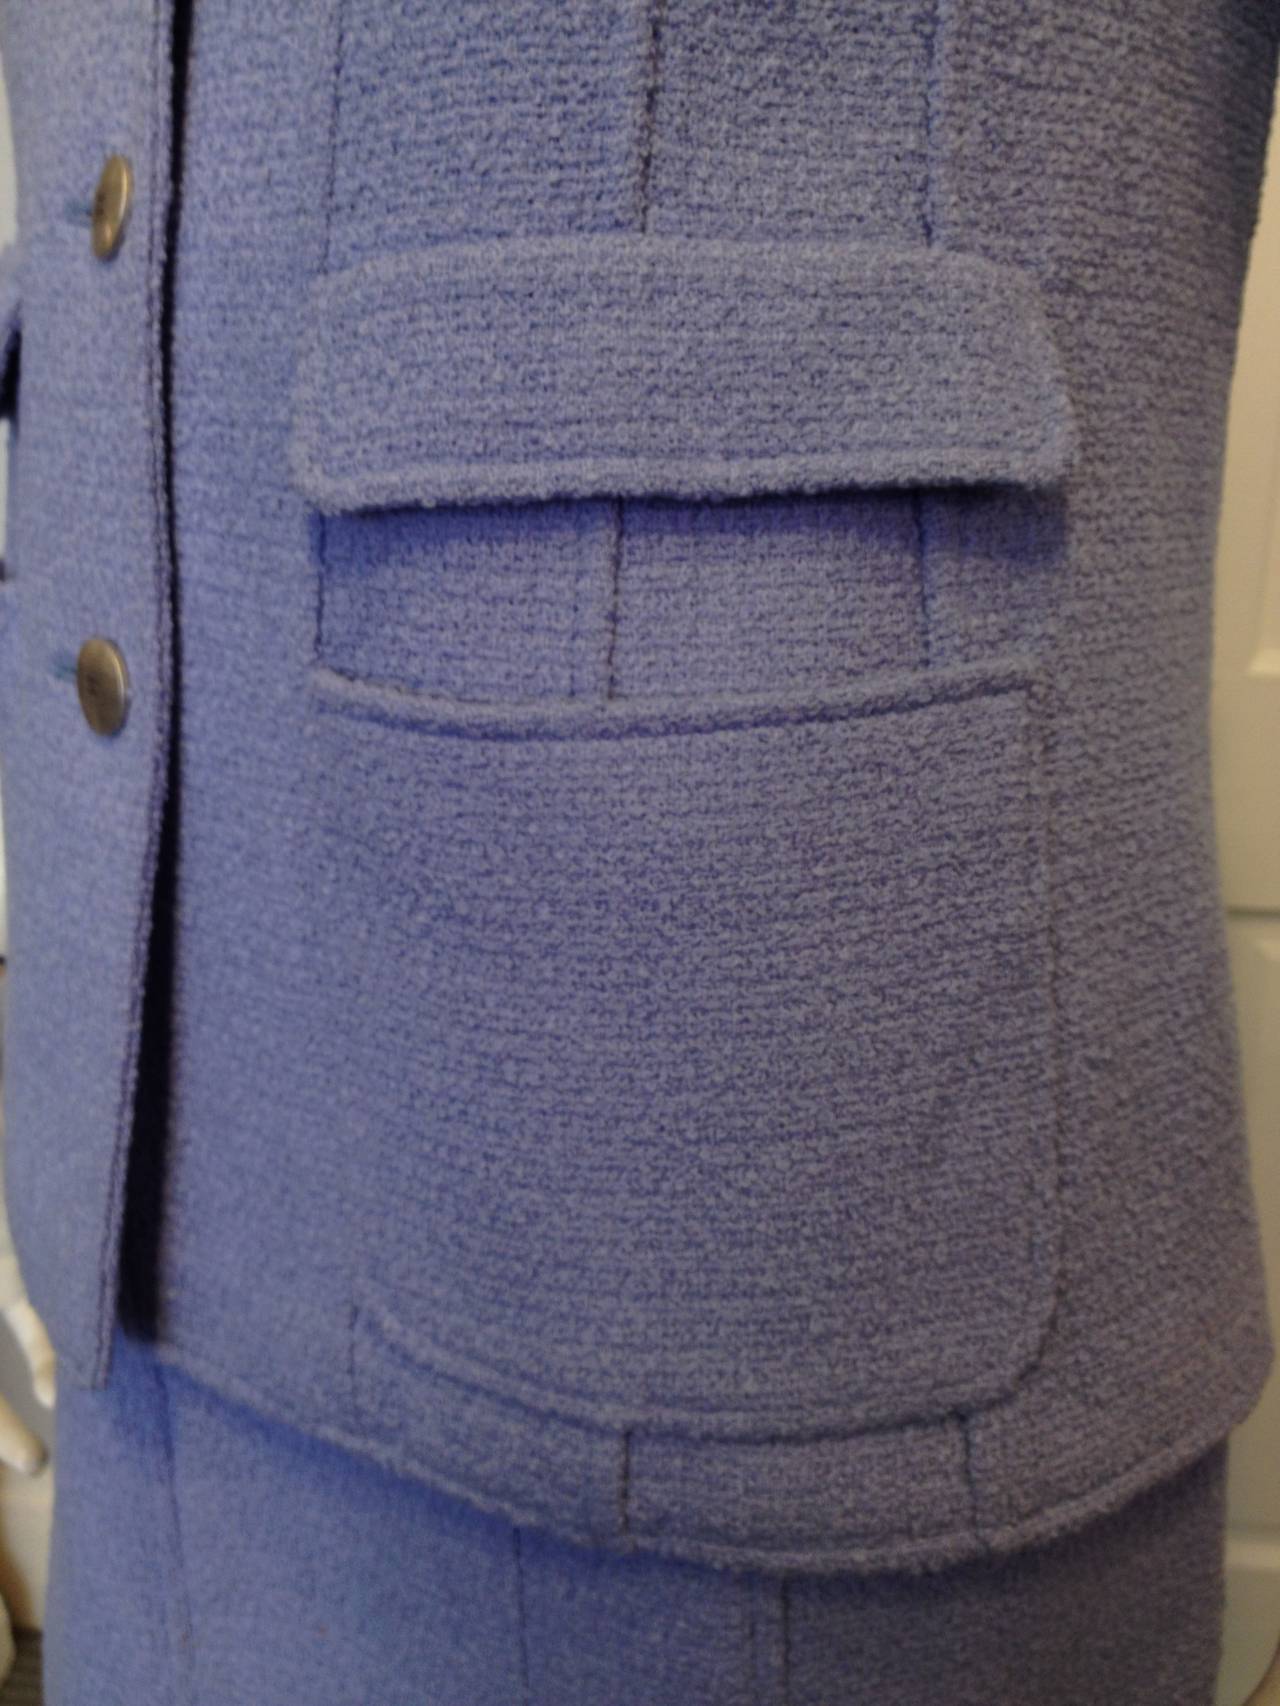 Chanel Periwinkle Blue Tweed Skirt Suit In Excellent Condition For Sale In San Francisco, CA